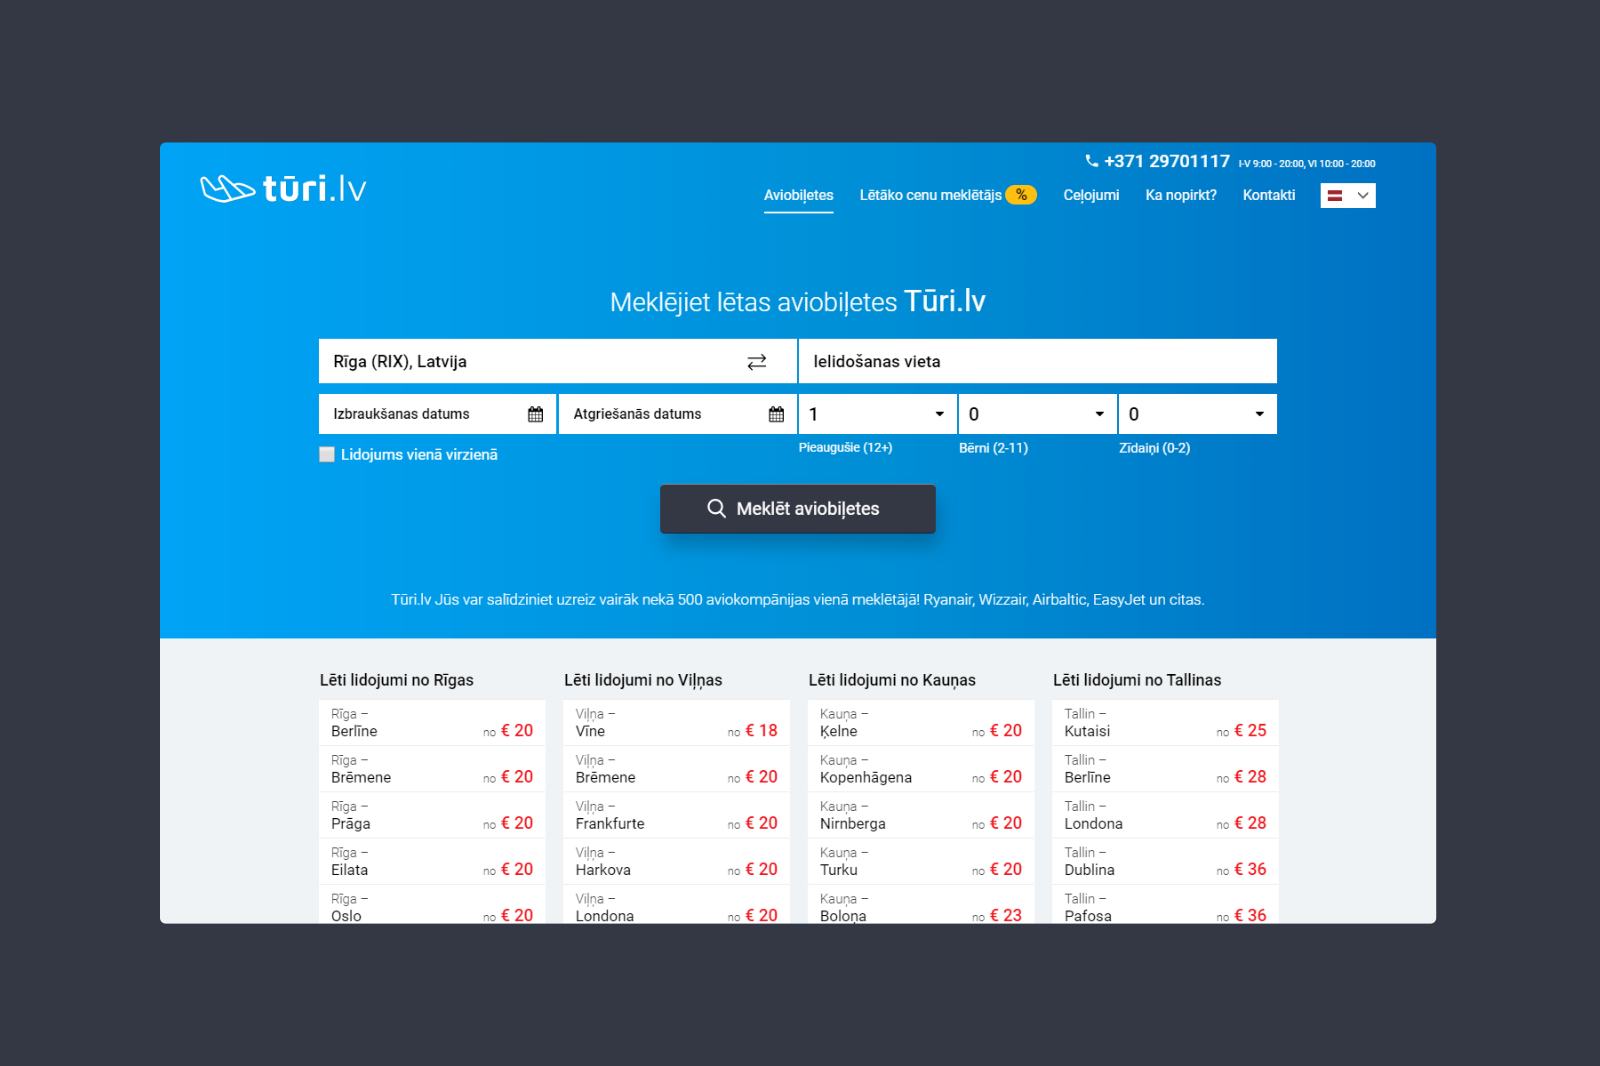 Turi.lv airline ticket search system